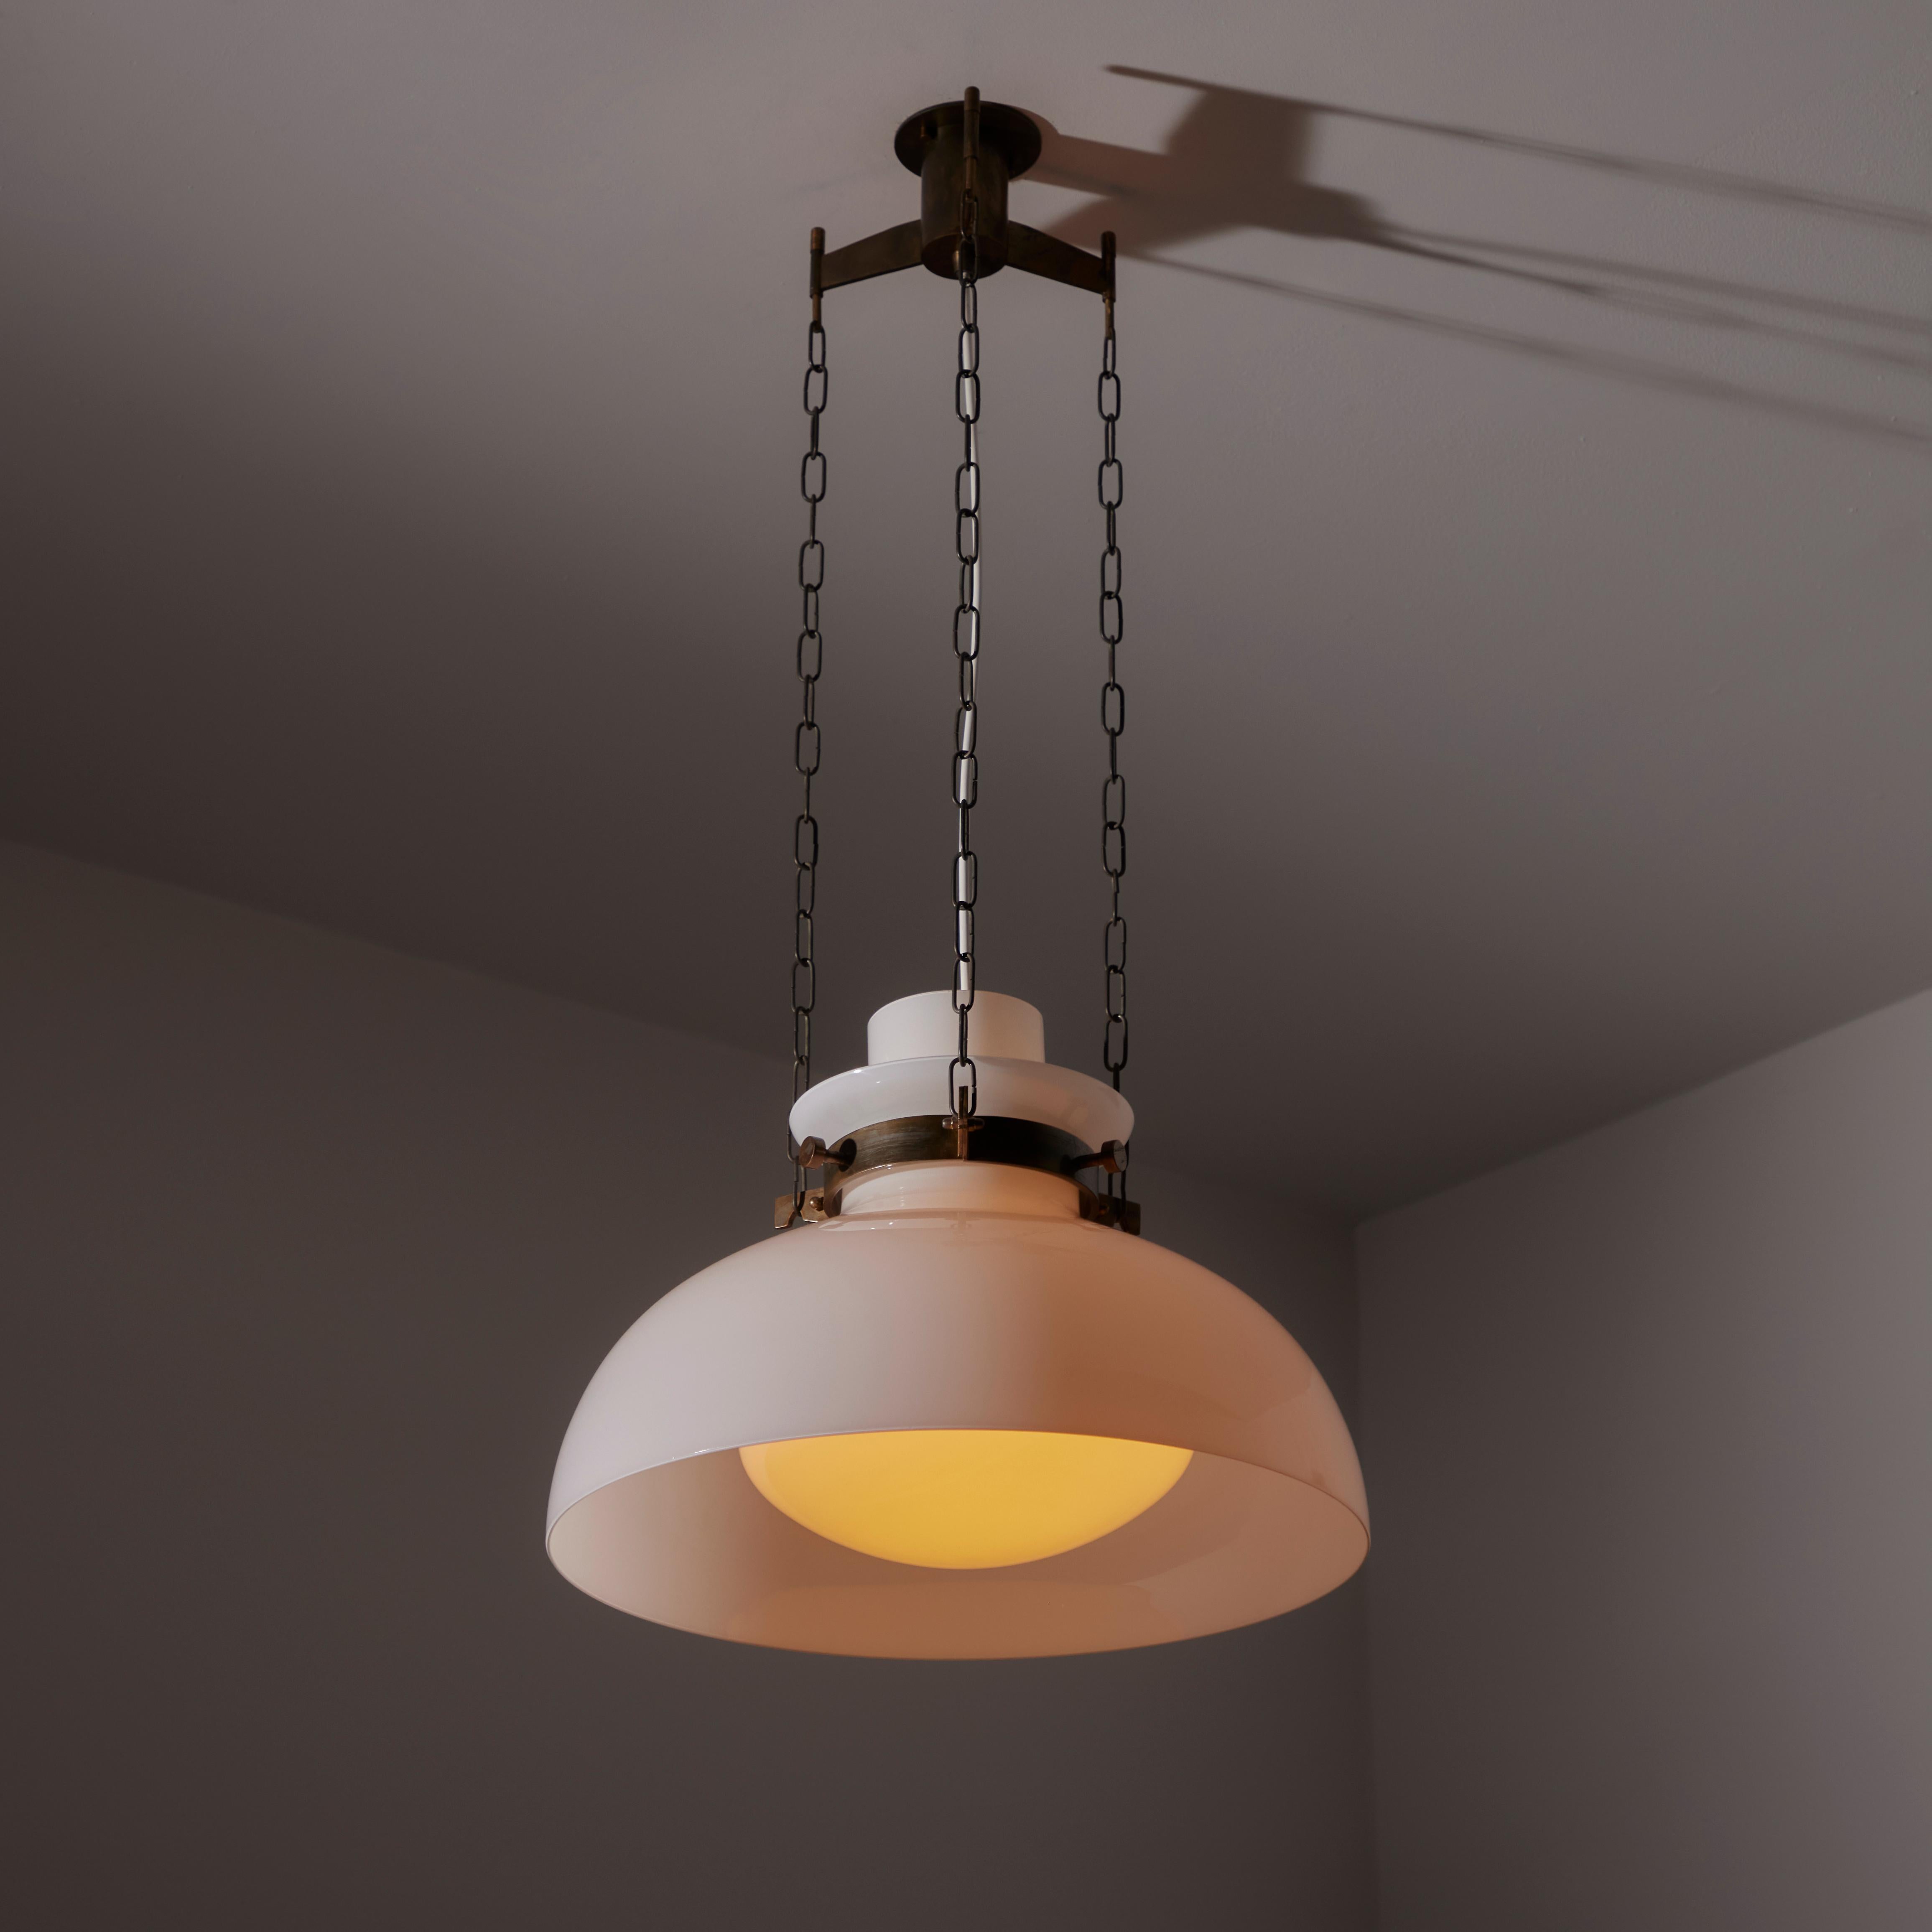 Mid-Century Modern Ceiling Light by Paolo Caliari for Venini